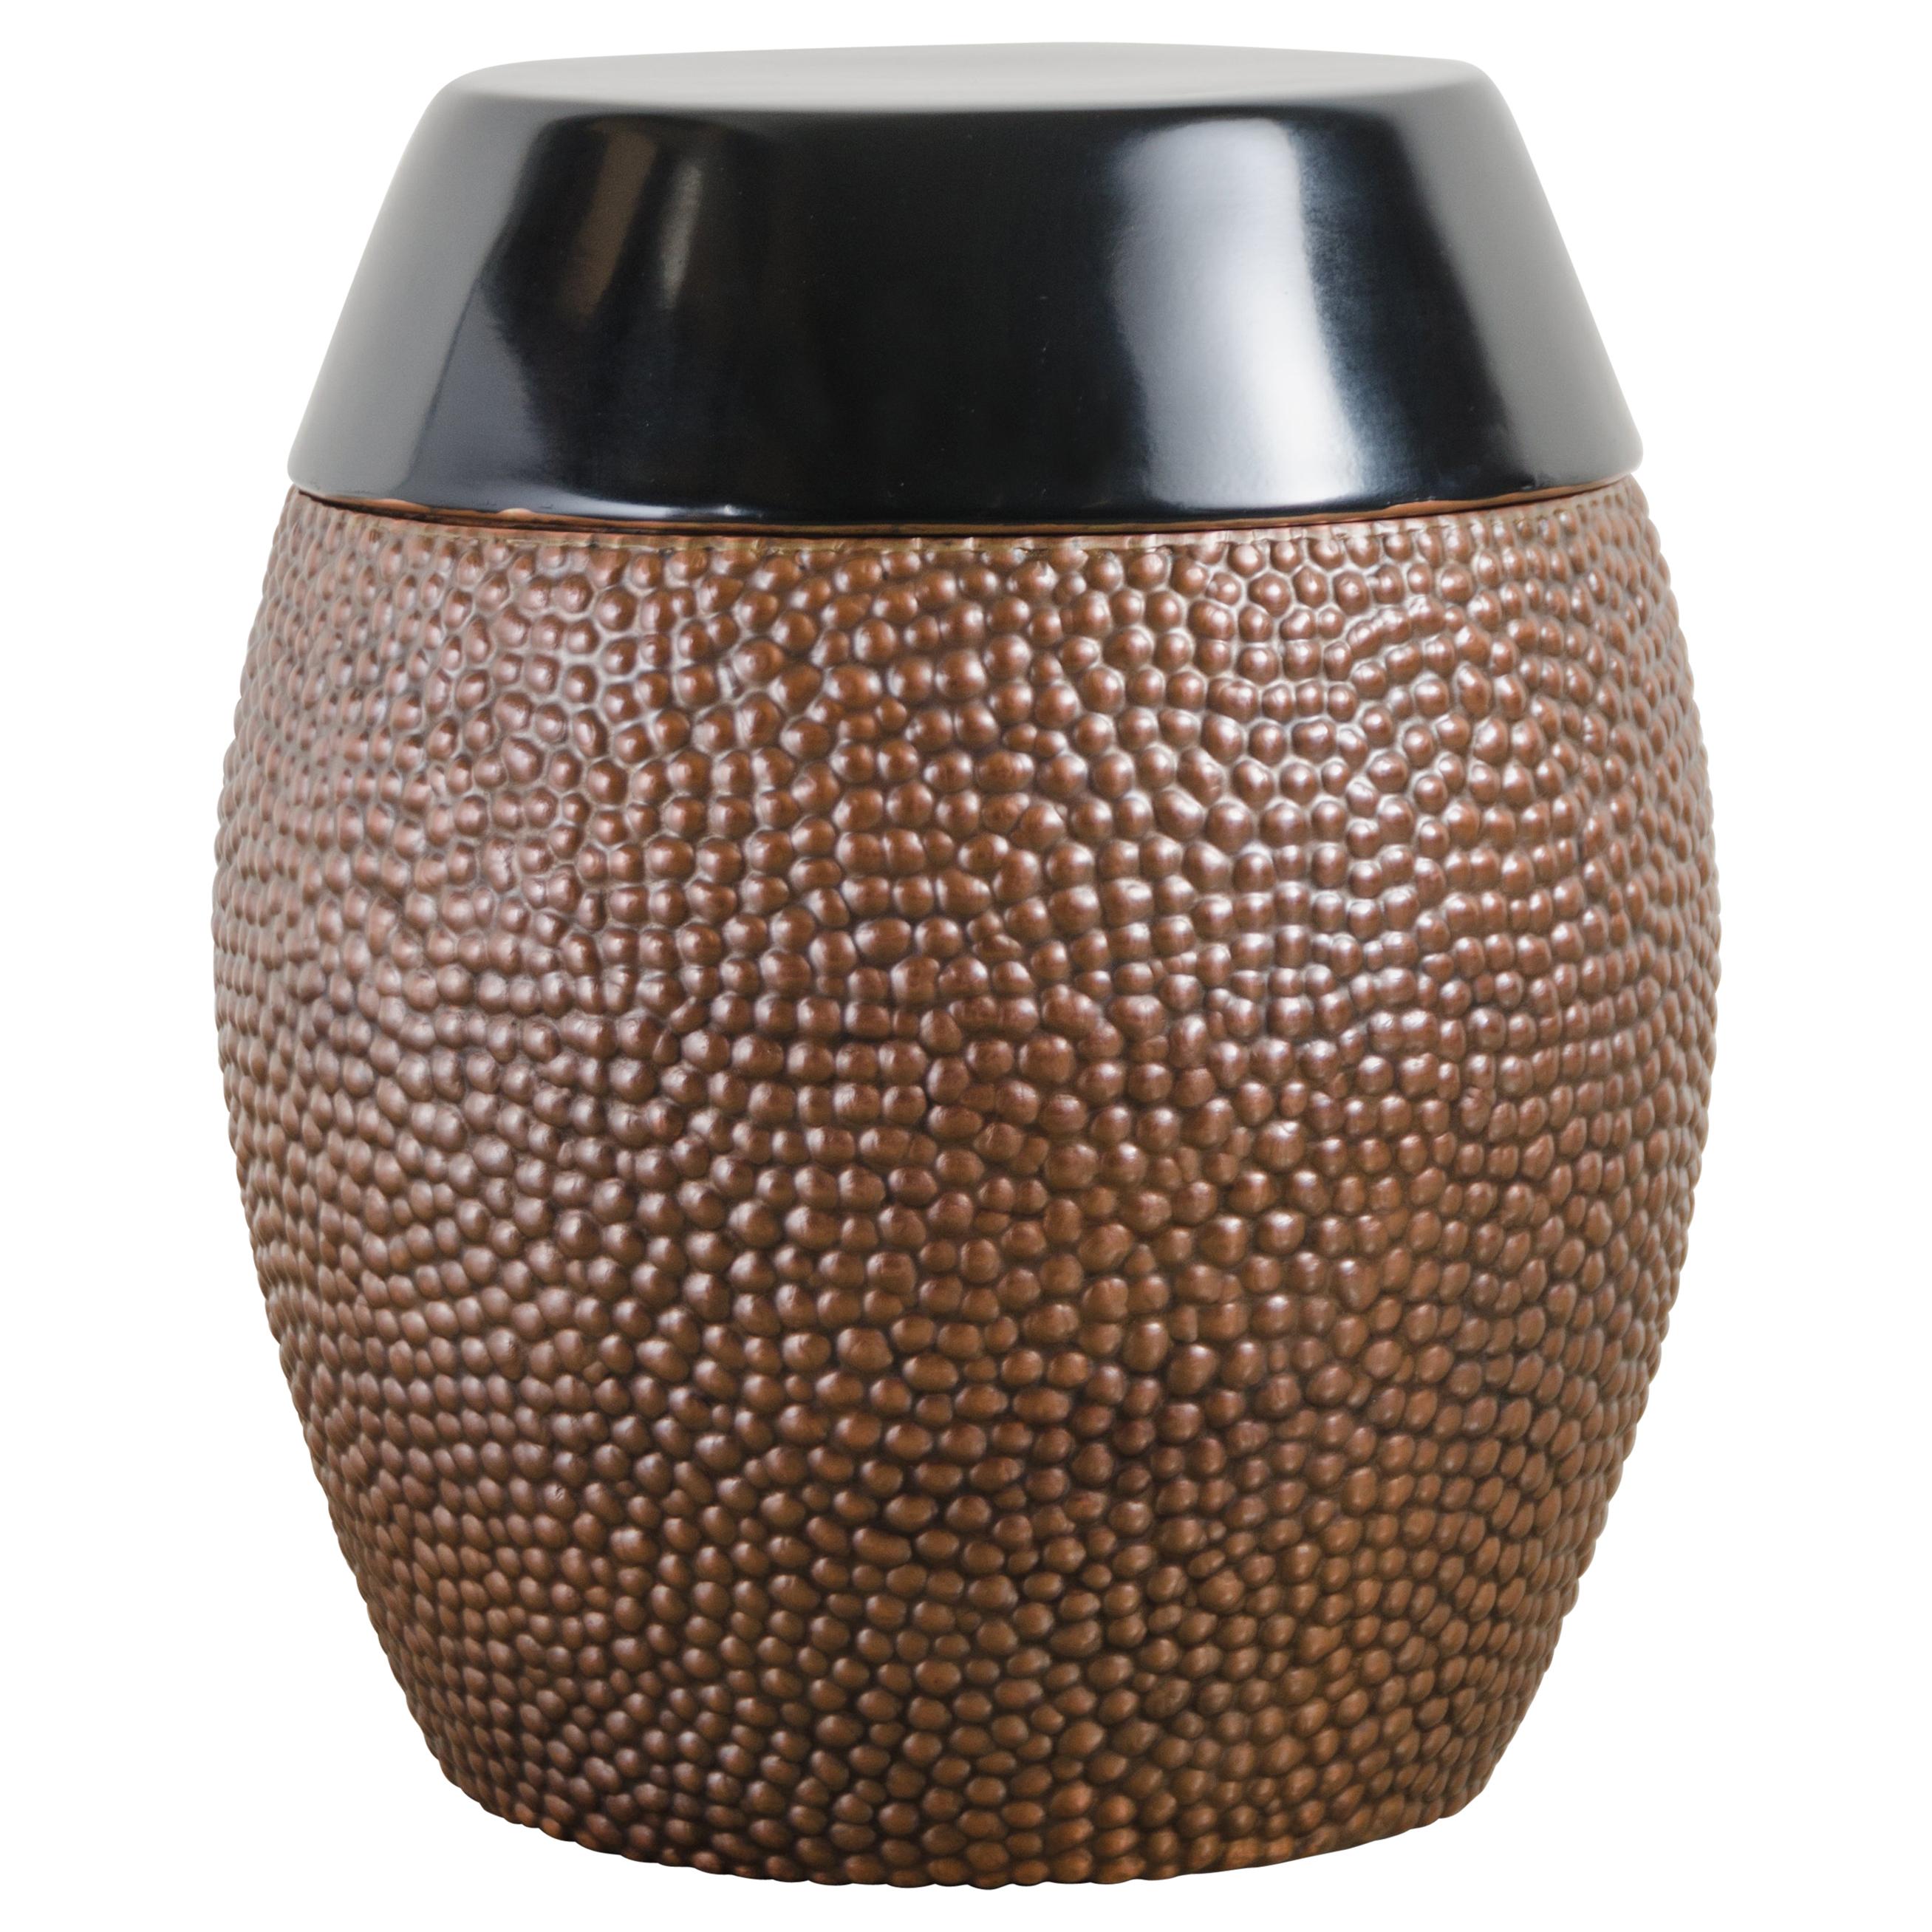 Toad Skin Barrel Storage Drum Stool, Copper and Black Lacquer by Robert Kuo